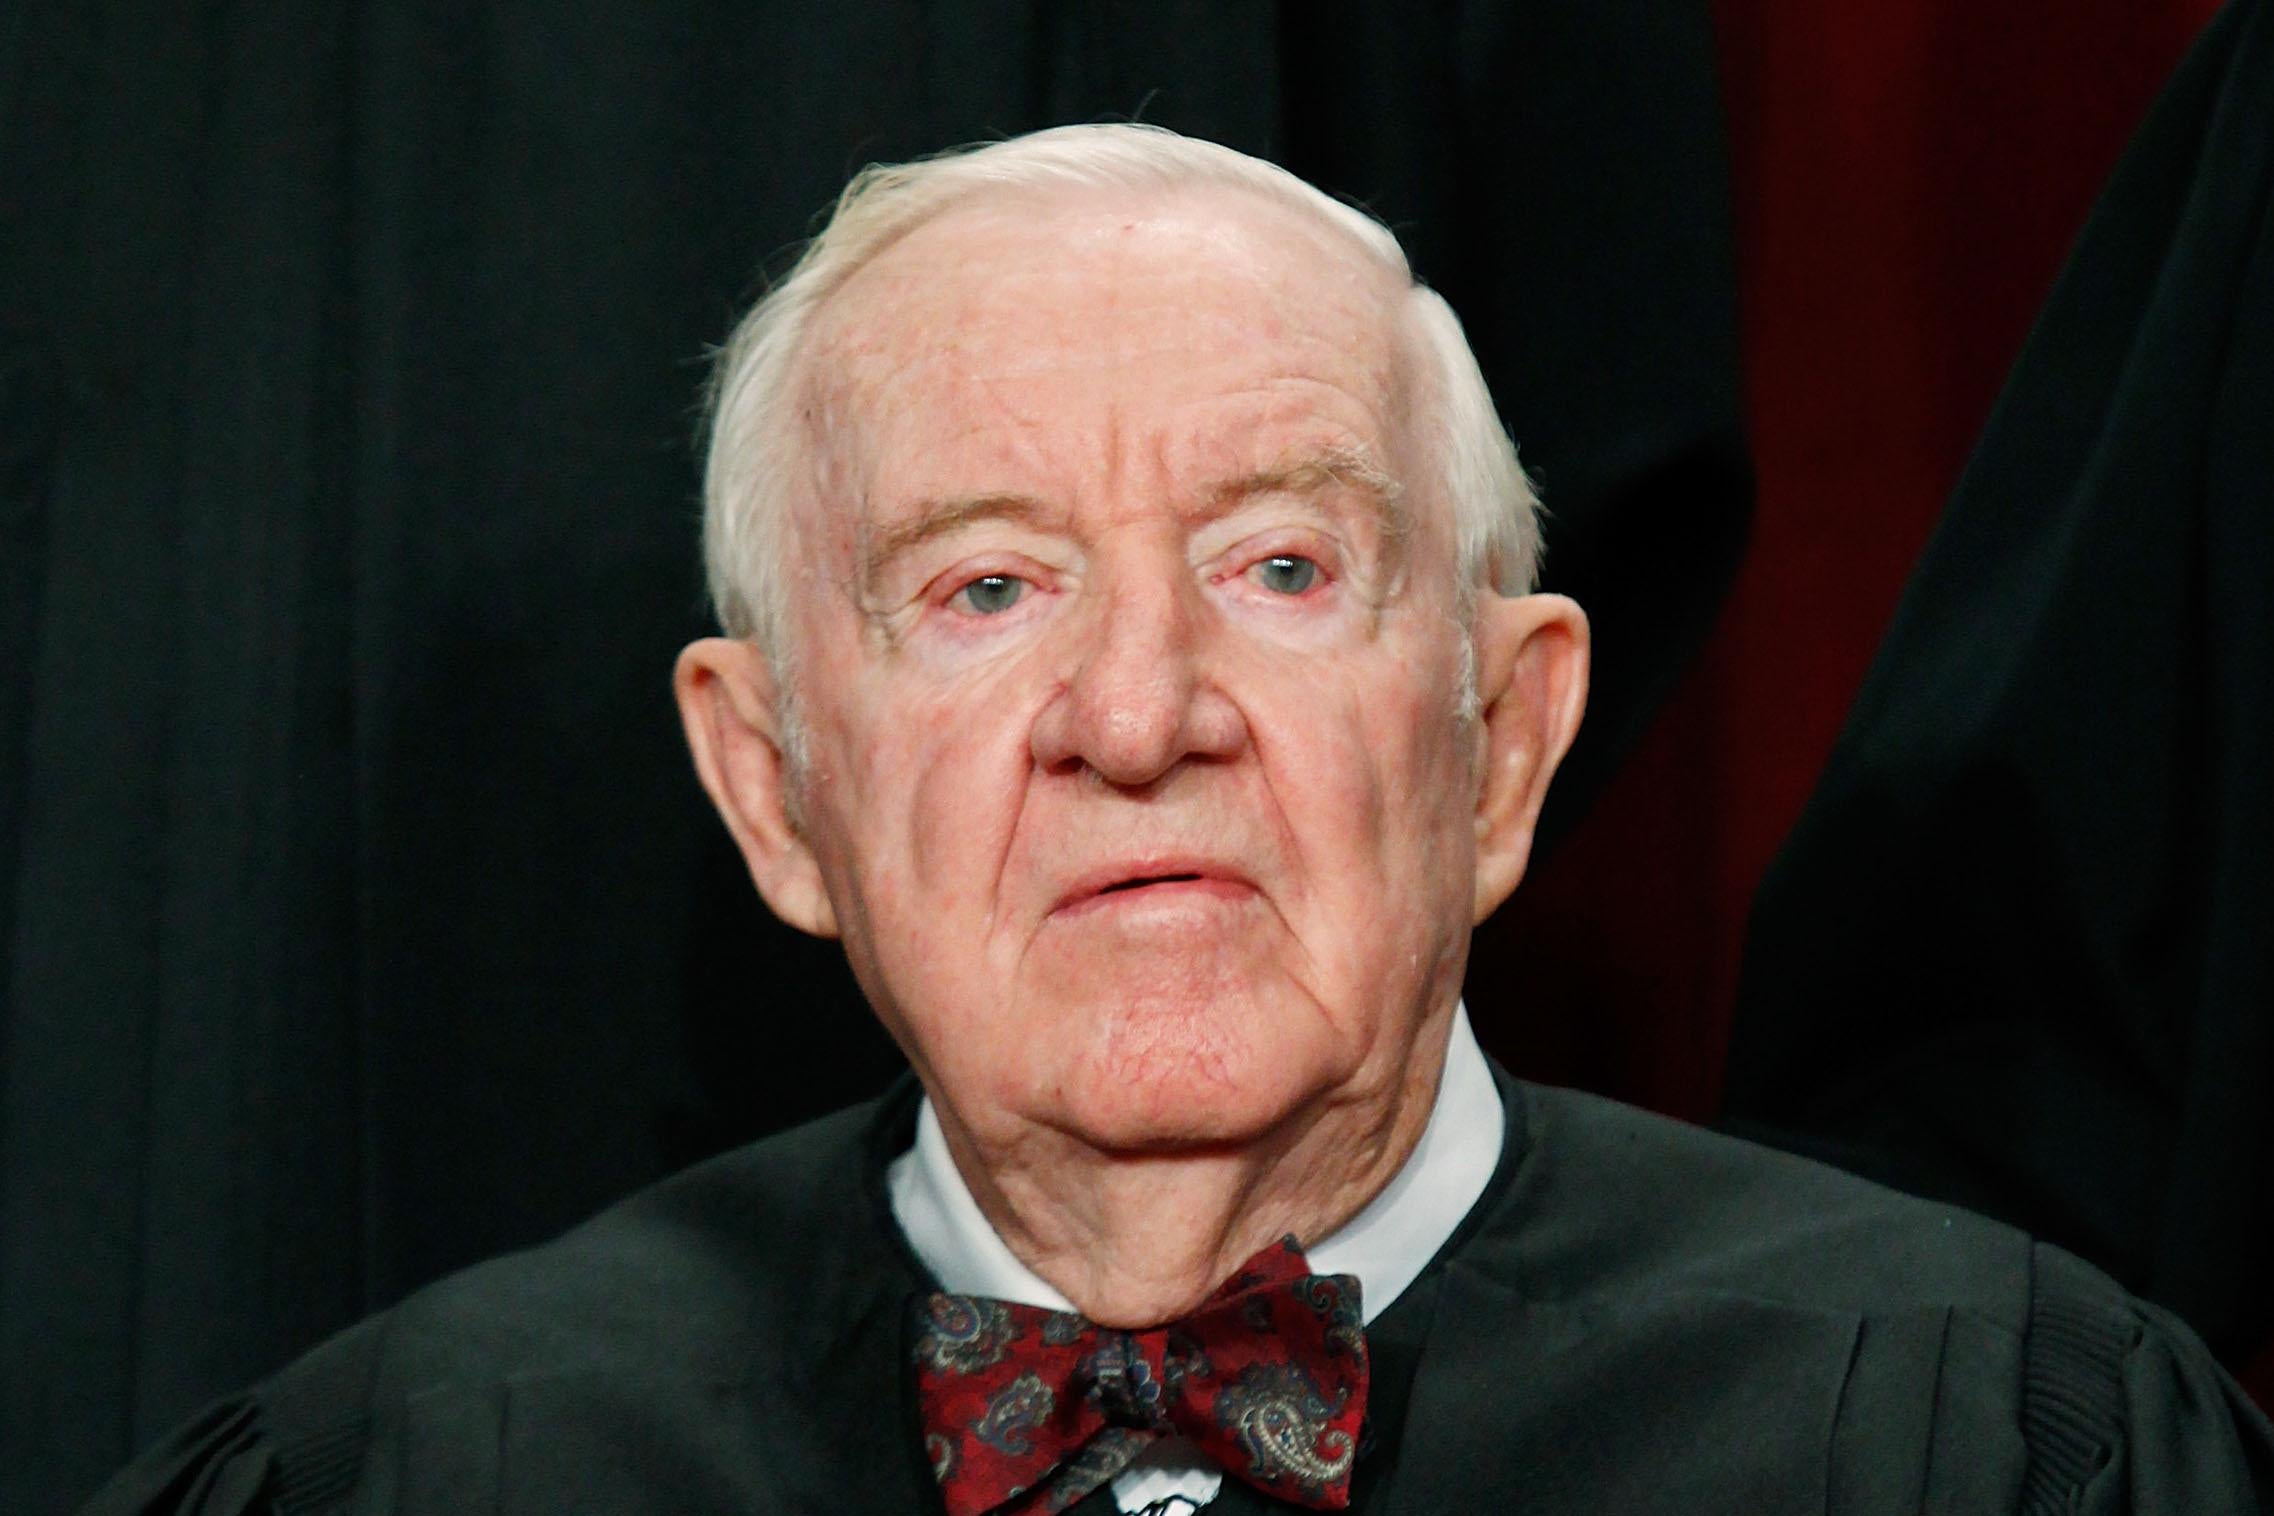 John Paul Stevens poses for a photo in his robes.